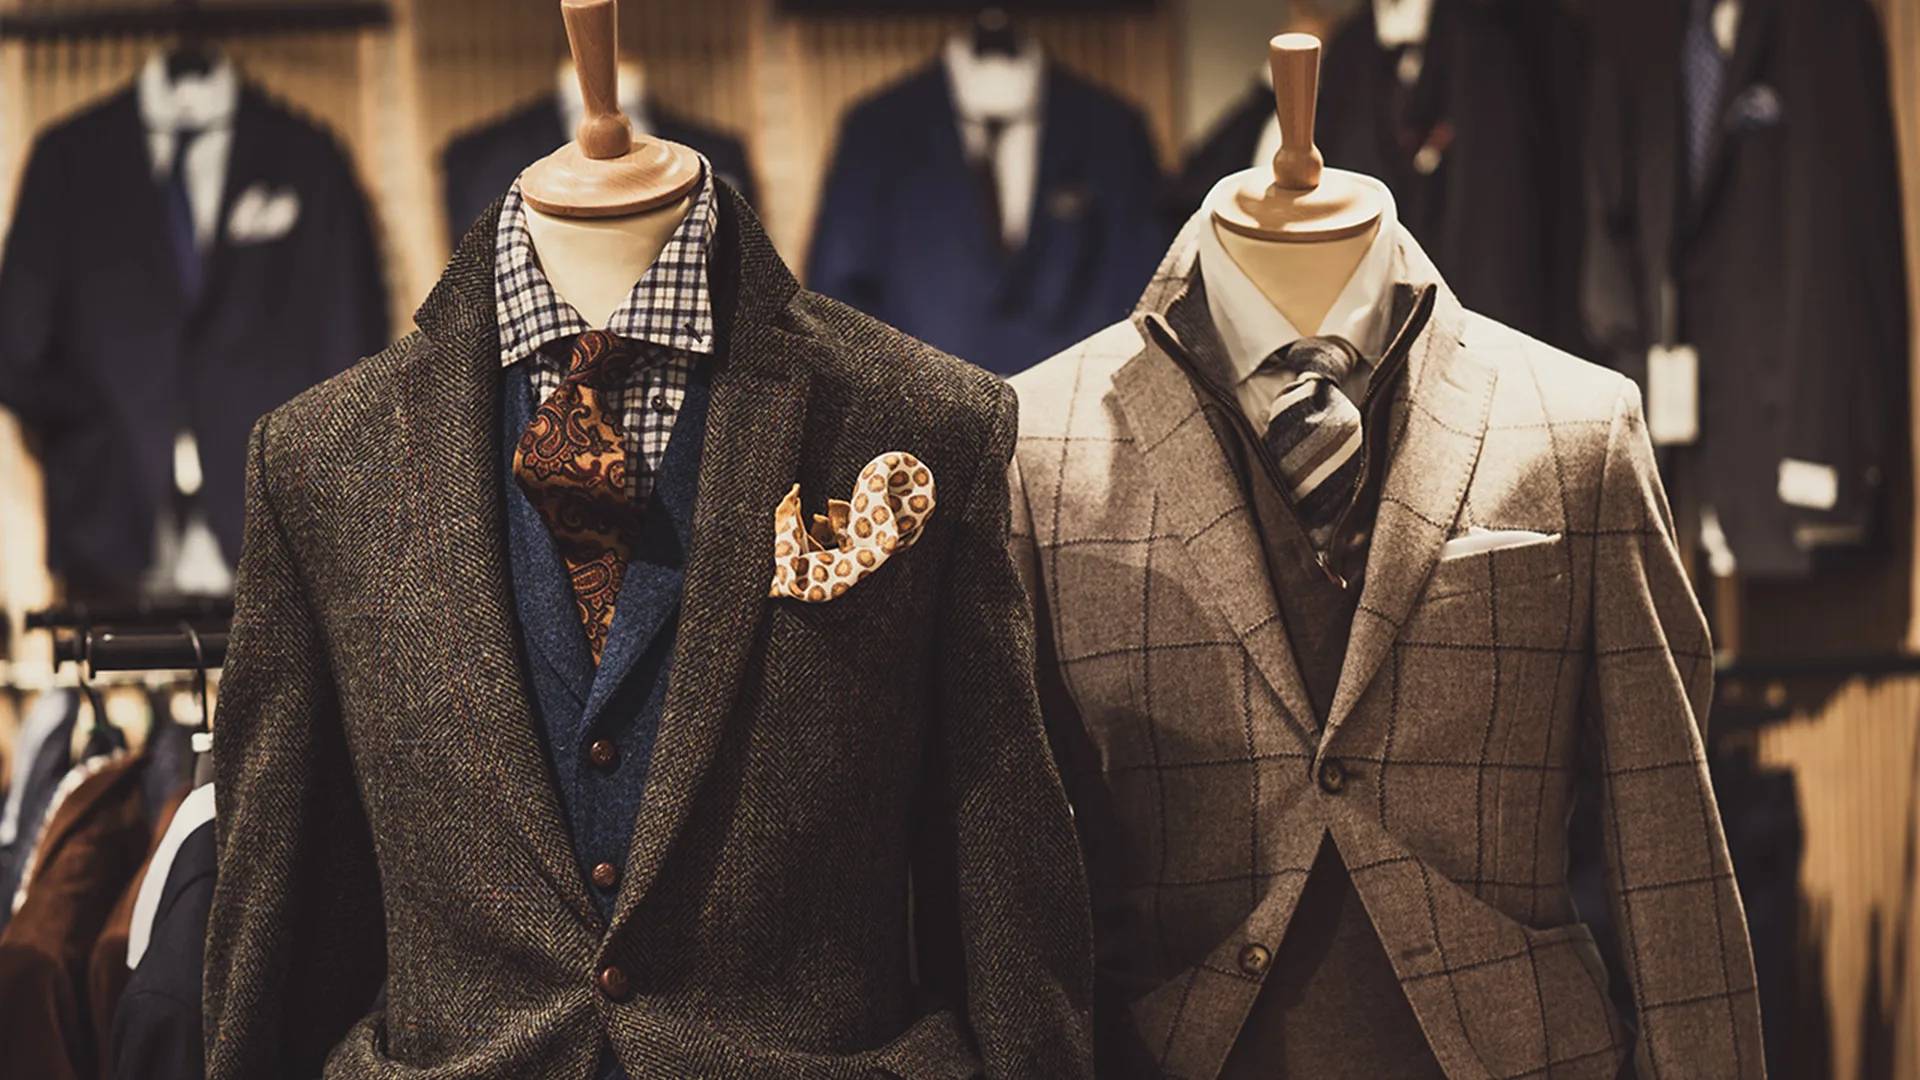 Two mannequins dressed with suits and shirts